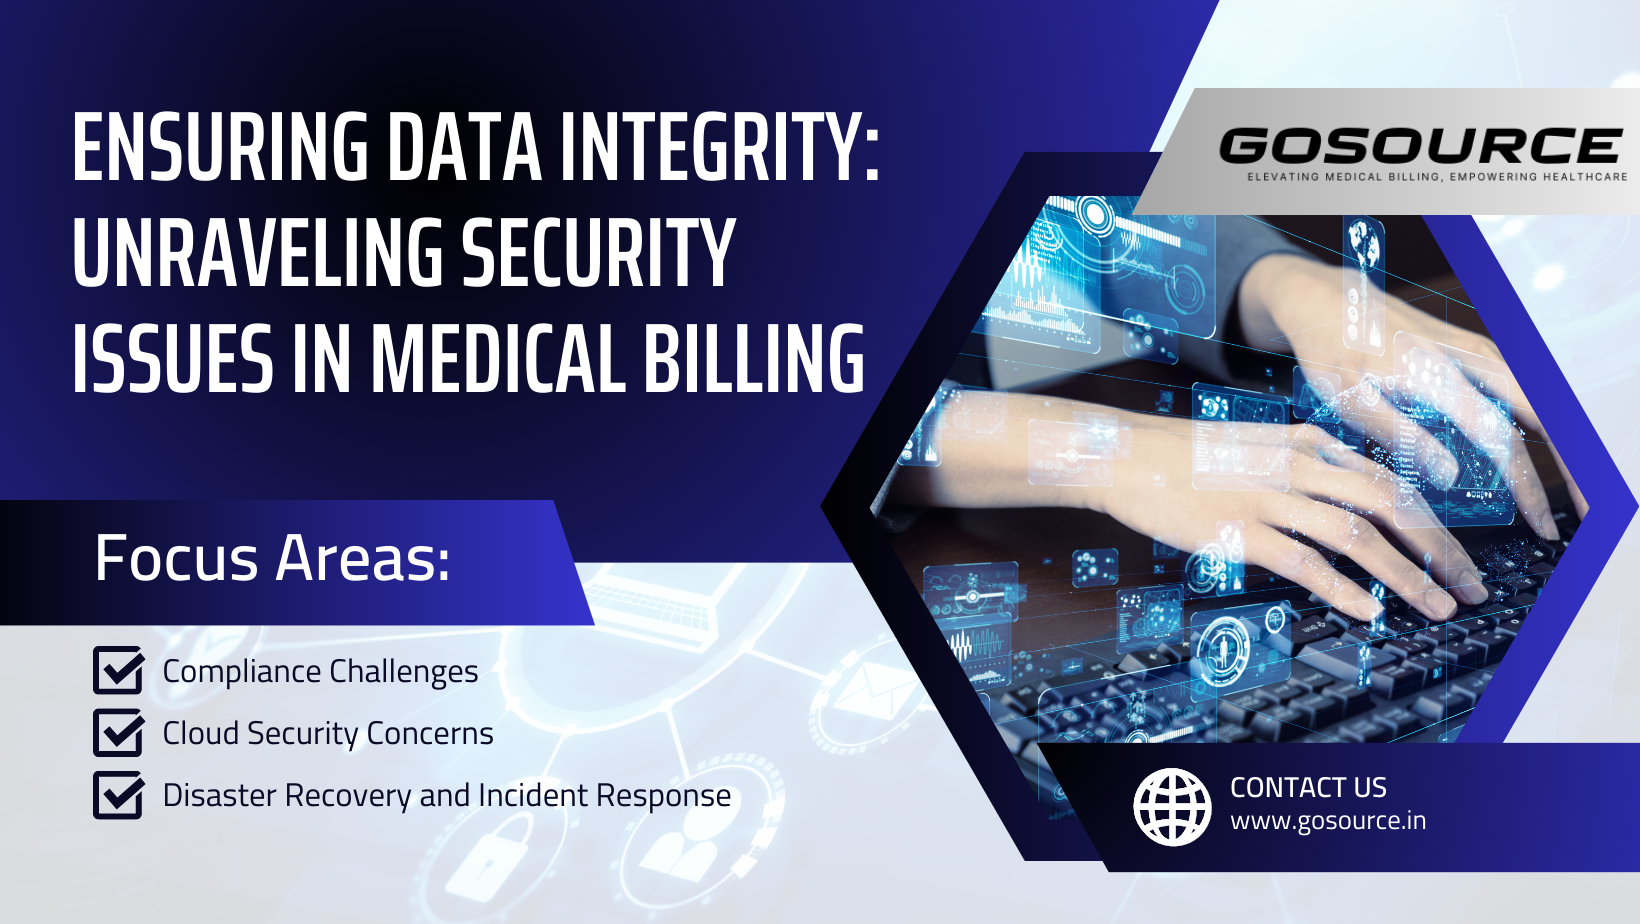 Ensuring Data Integrity: Unraveling Security Issues in Medical Billing